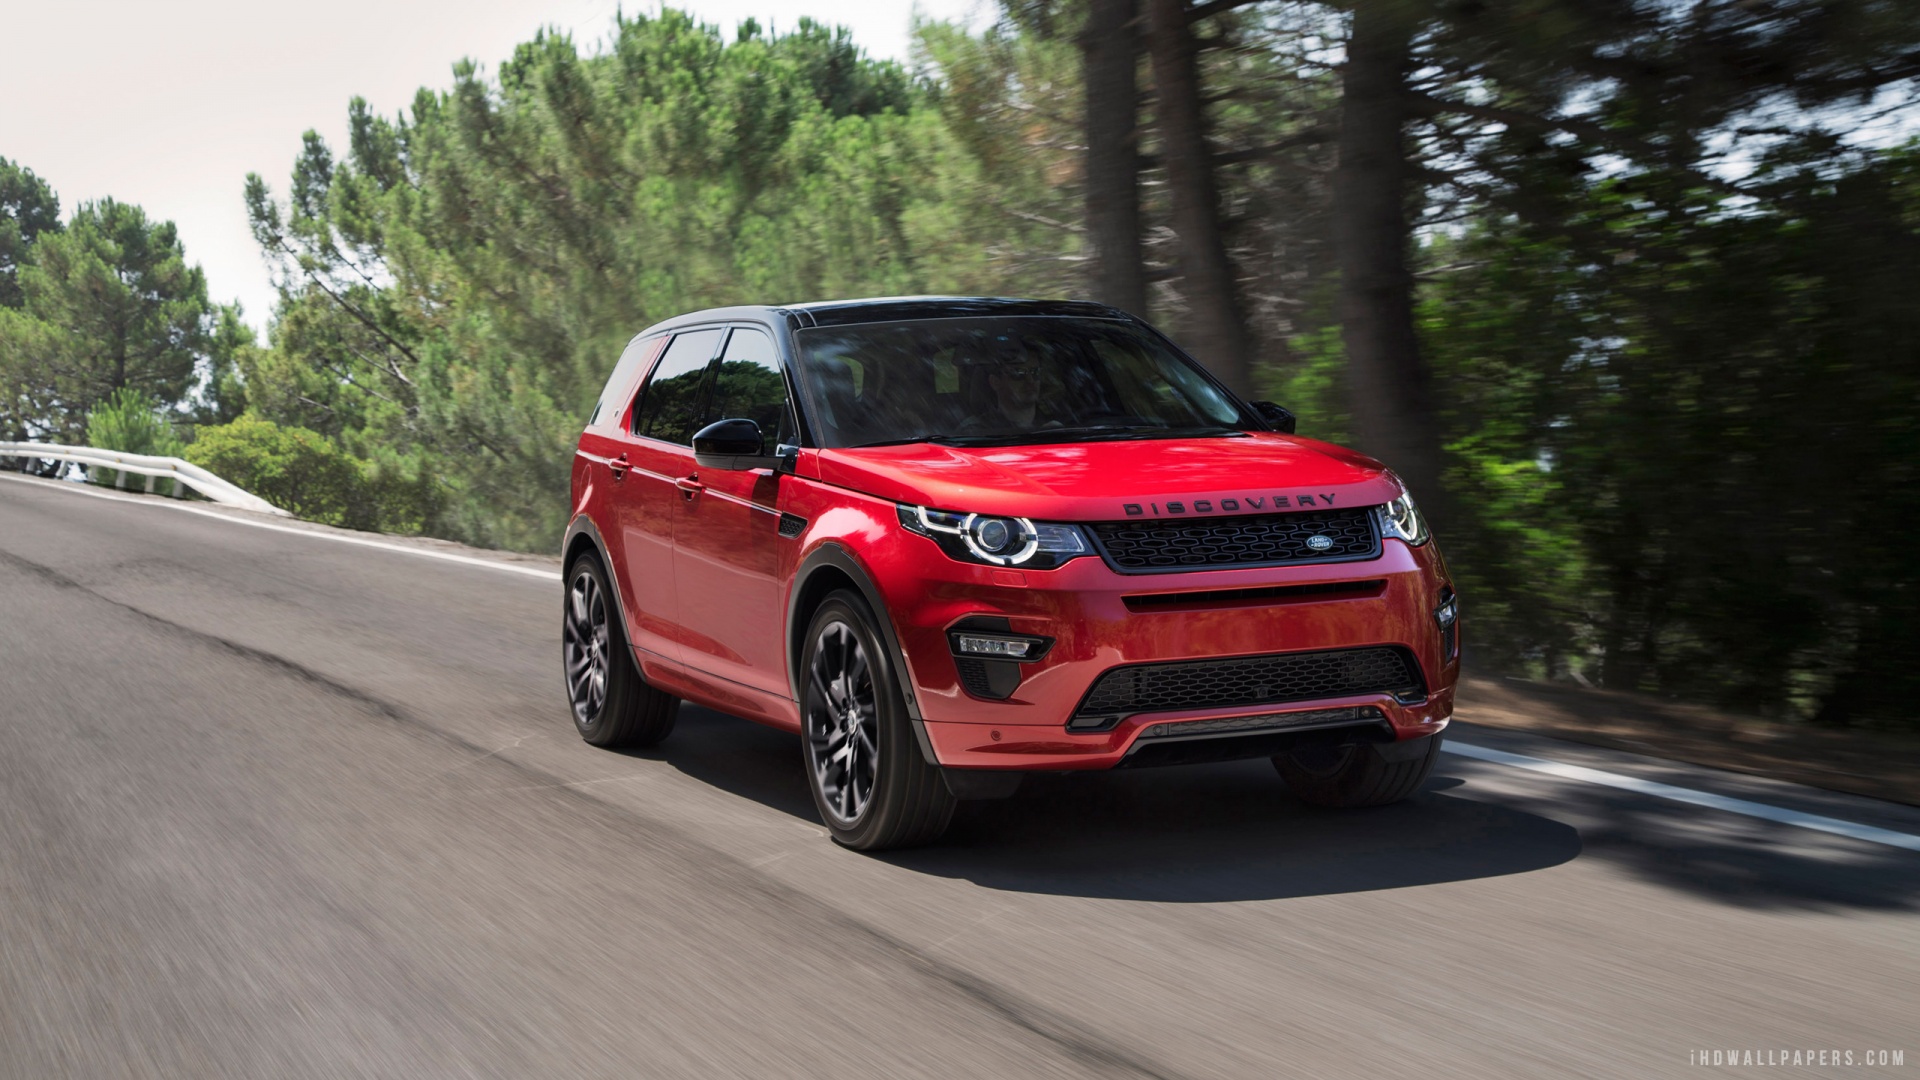 Range Rover Discovery Hd Wallpaper